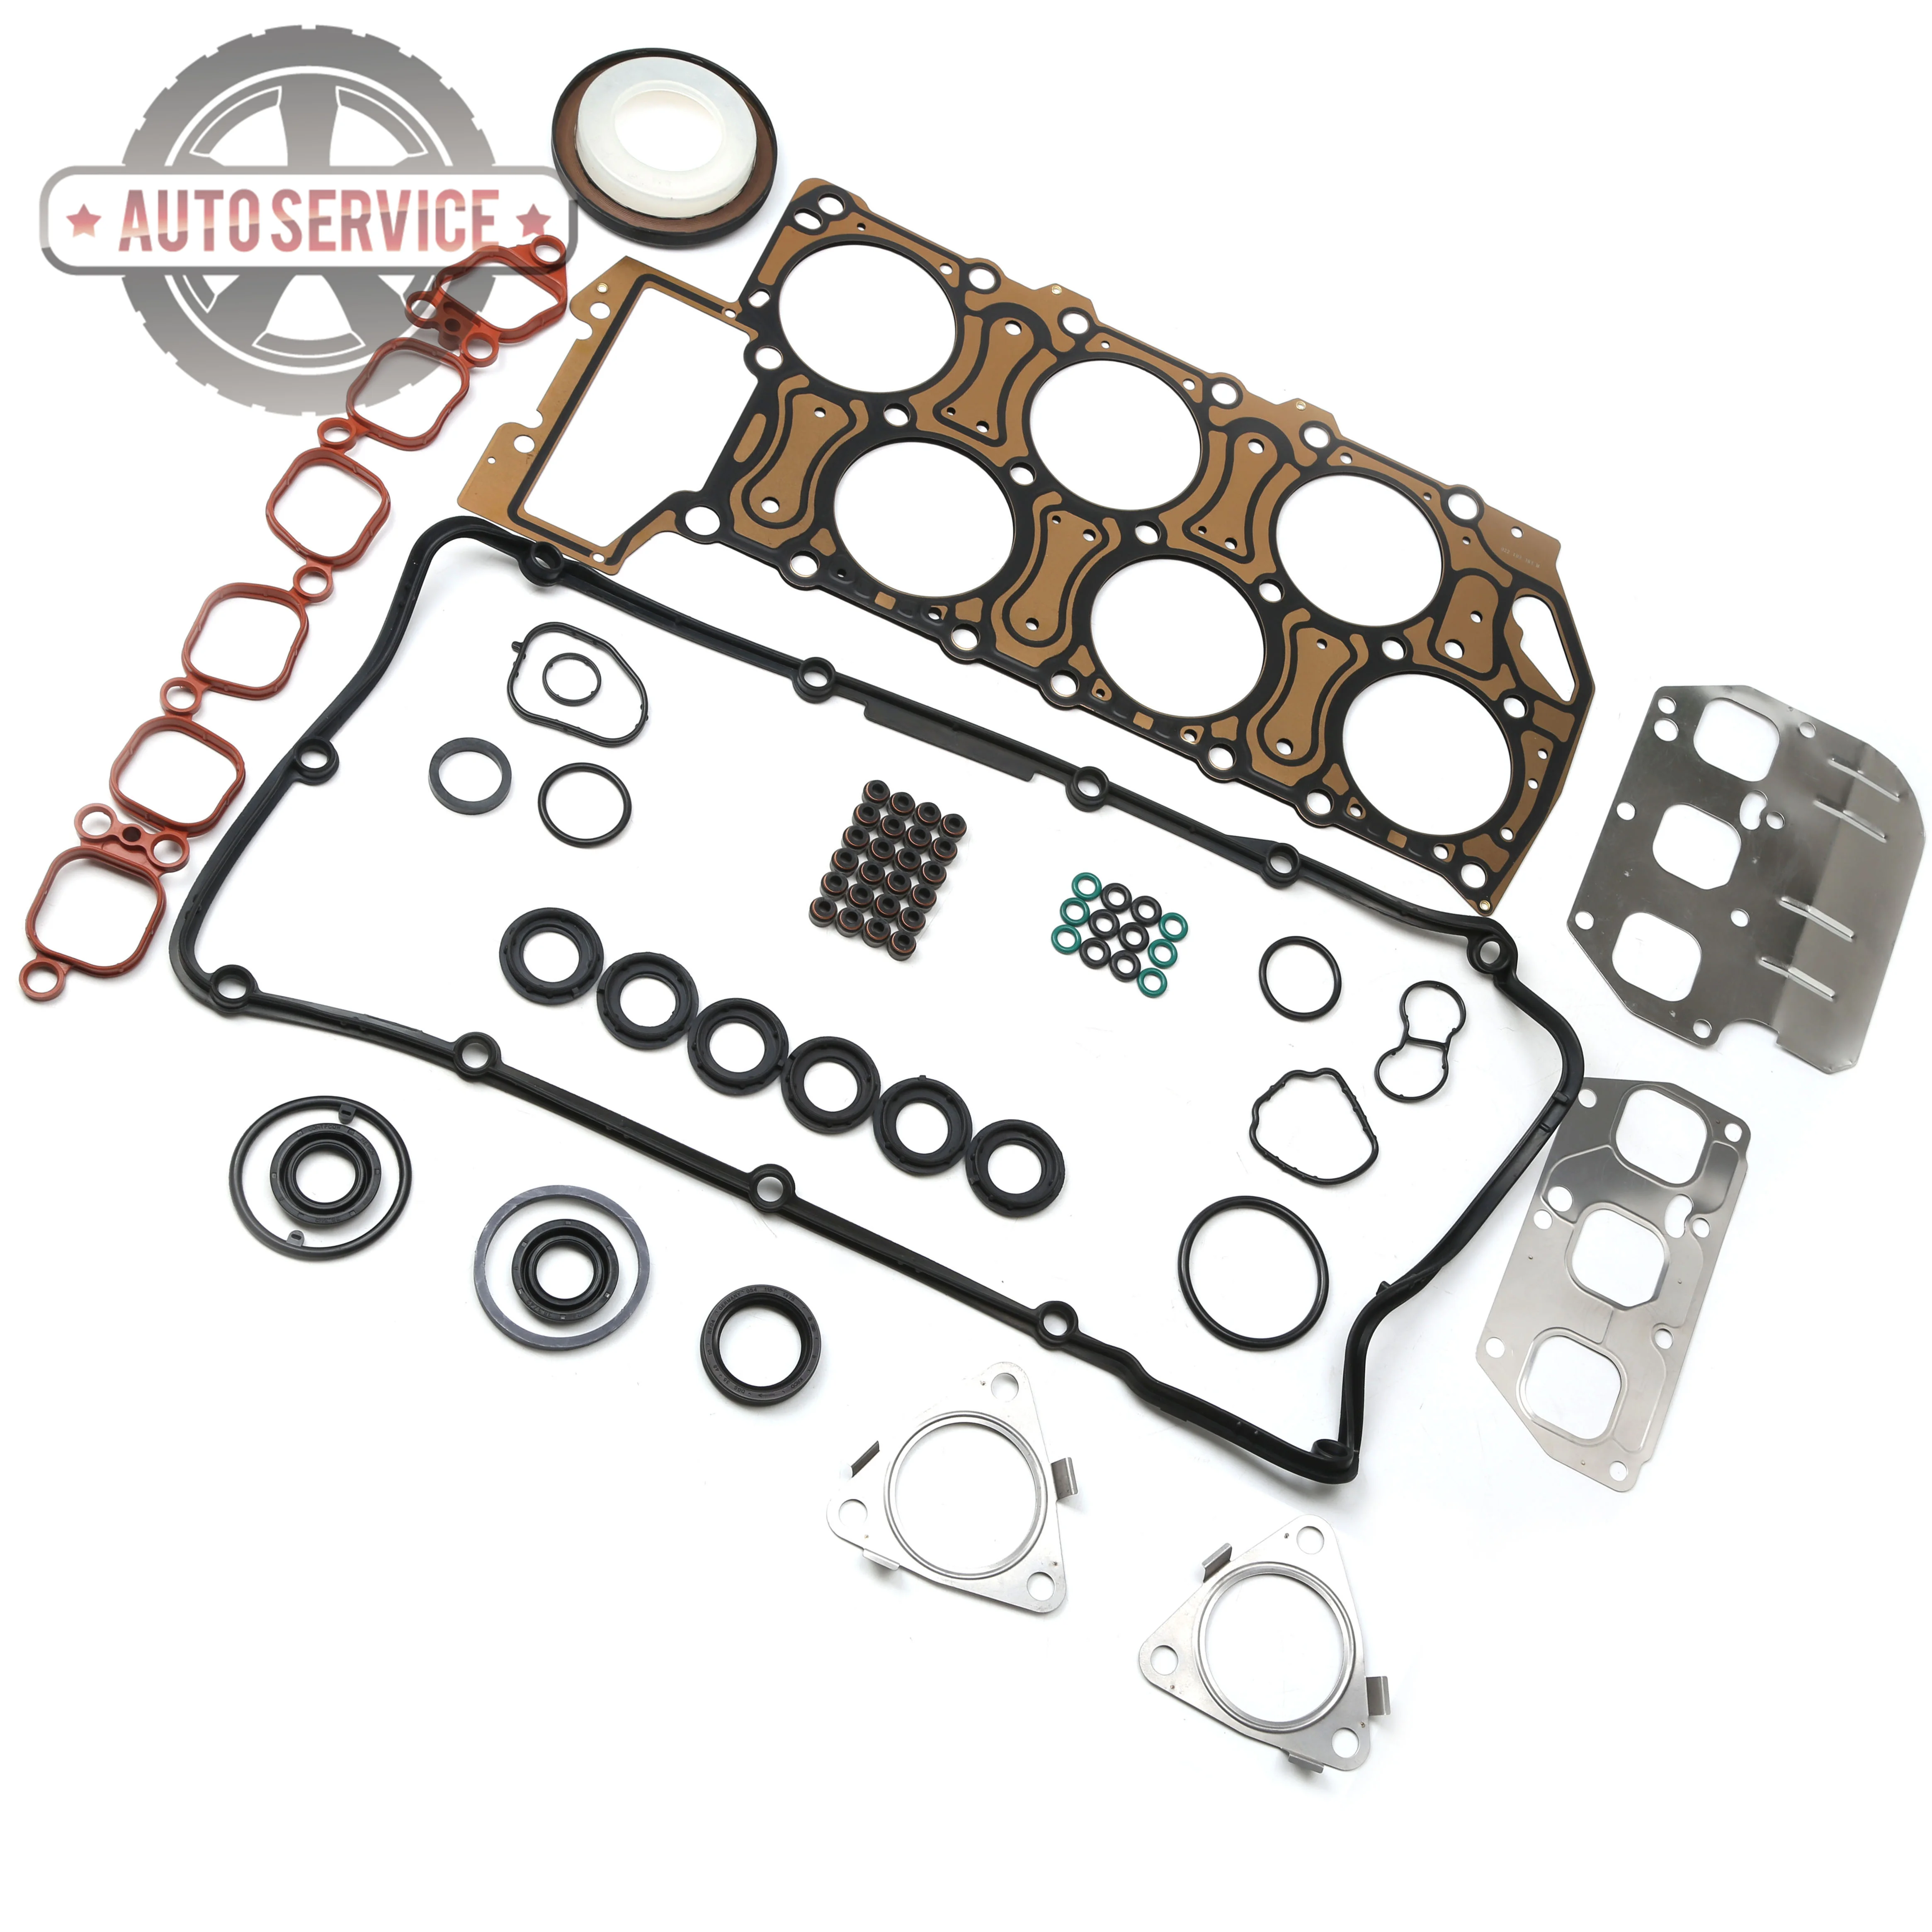 MLS Cyl. 85MM Engine Overhaul Kit For  Touareg 3.2L V6 Golf 2003-2009  A3/S3  30 - £506.32 GBP